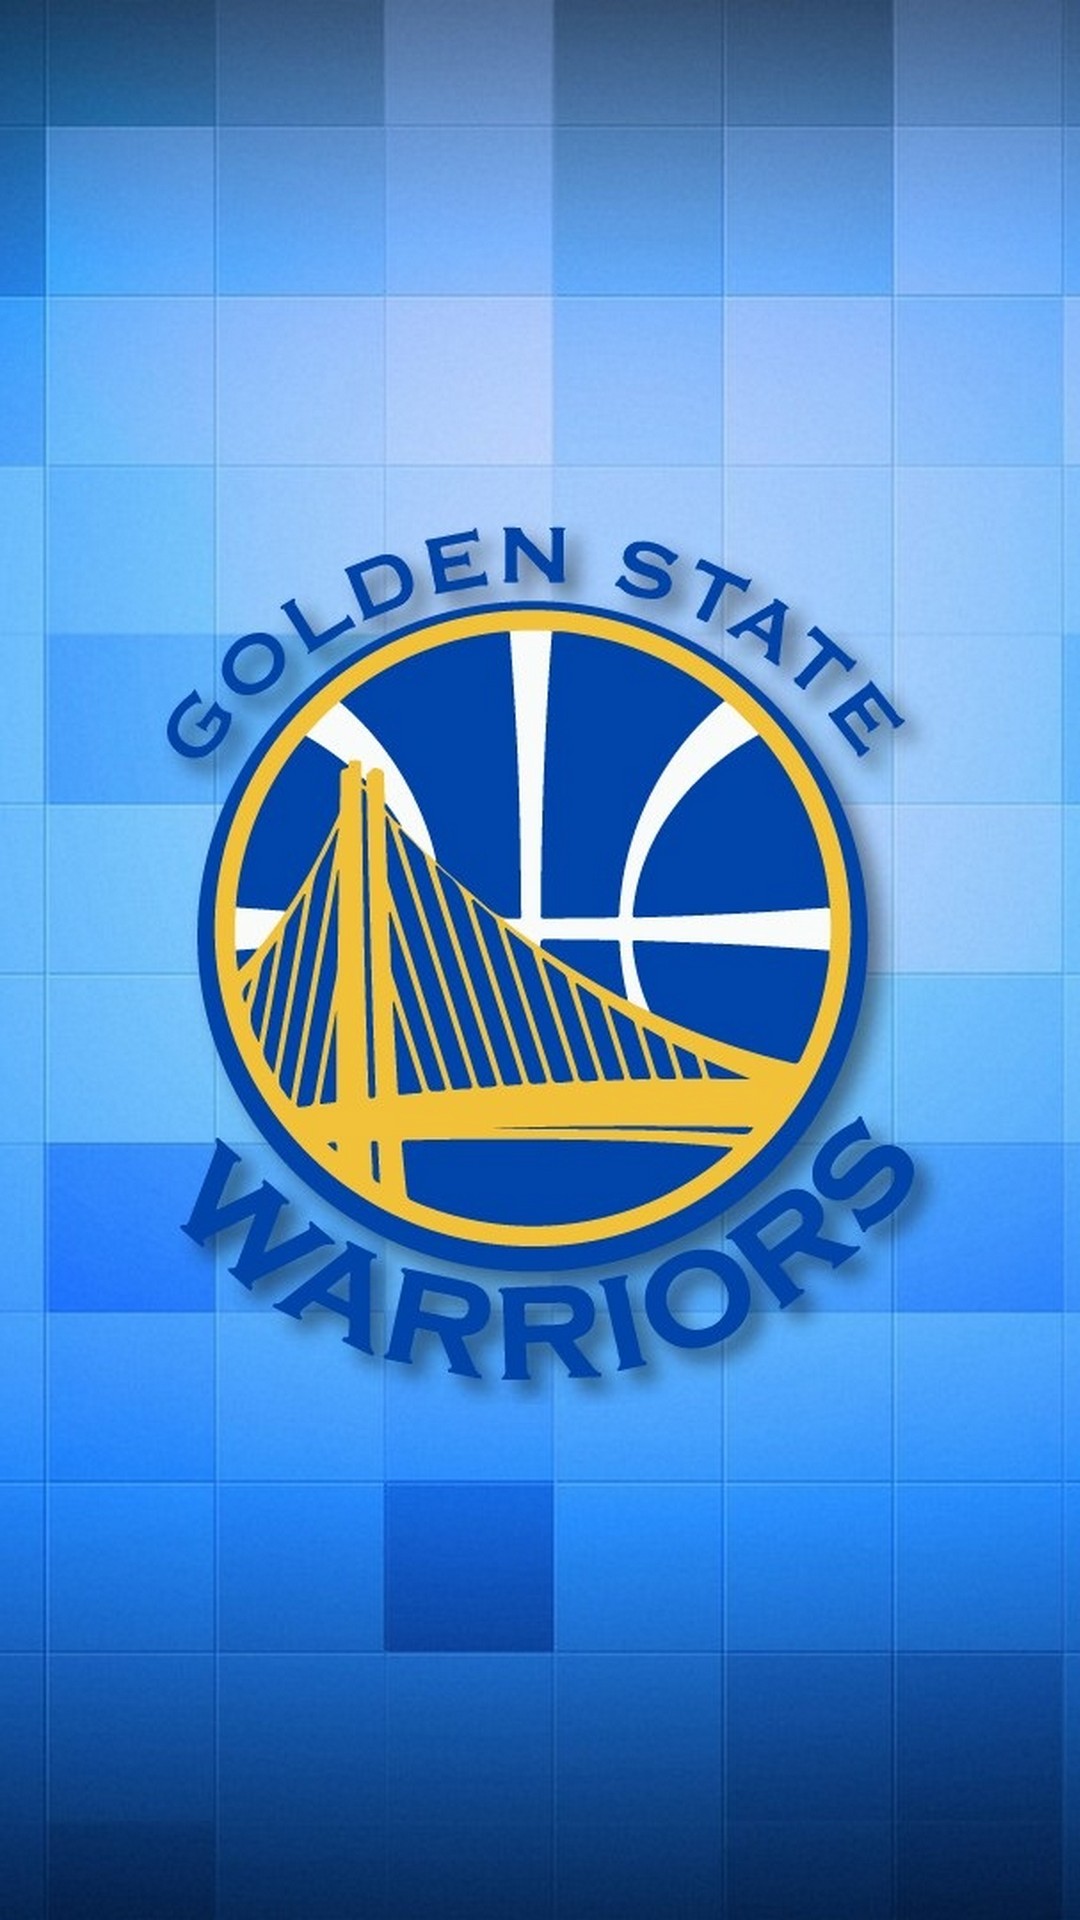 Golden State Warriors Wallpaper Android with image resolution 1080x1920 pixel. You can make this wallpaper for your Android backgrounds, Tablet, Smartphones Screensavers and Mobile Phone Lock Screen